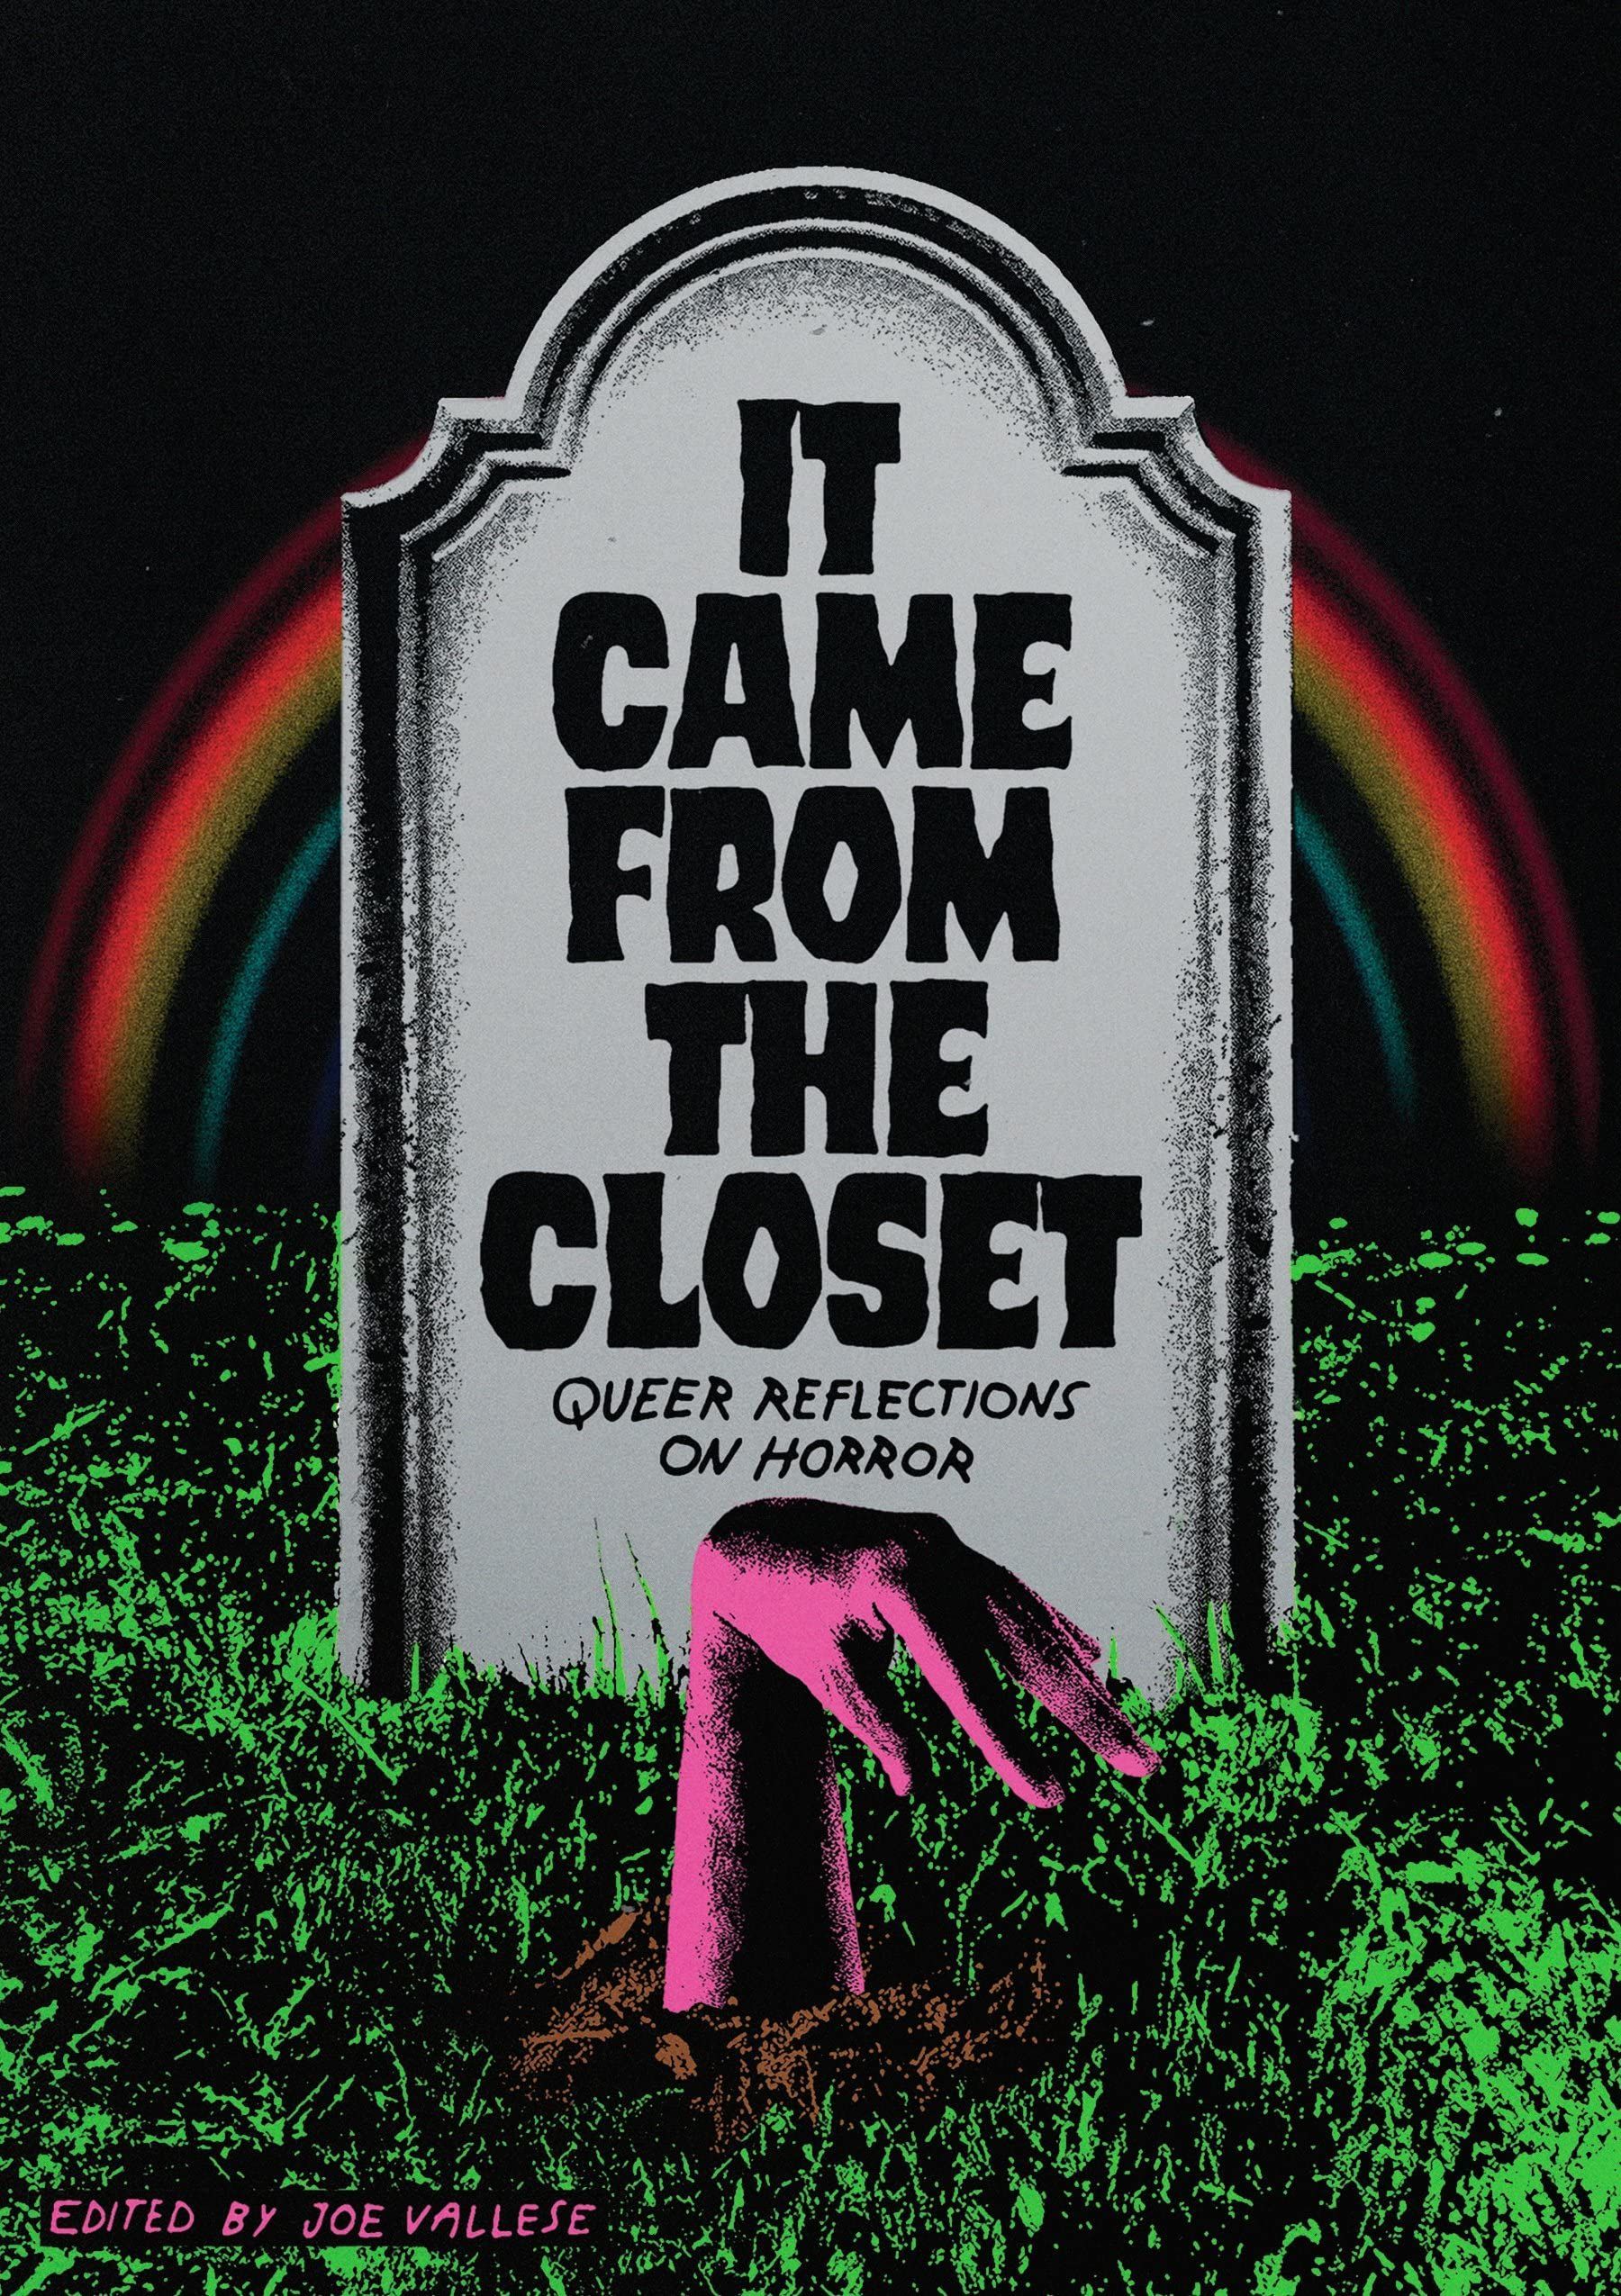 Nightmares Worth Indulging: On Feminist Press’s “It Came from the Closet”